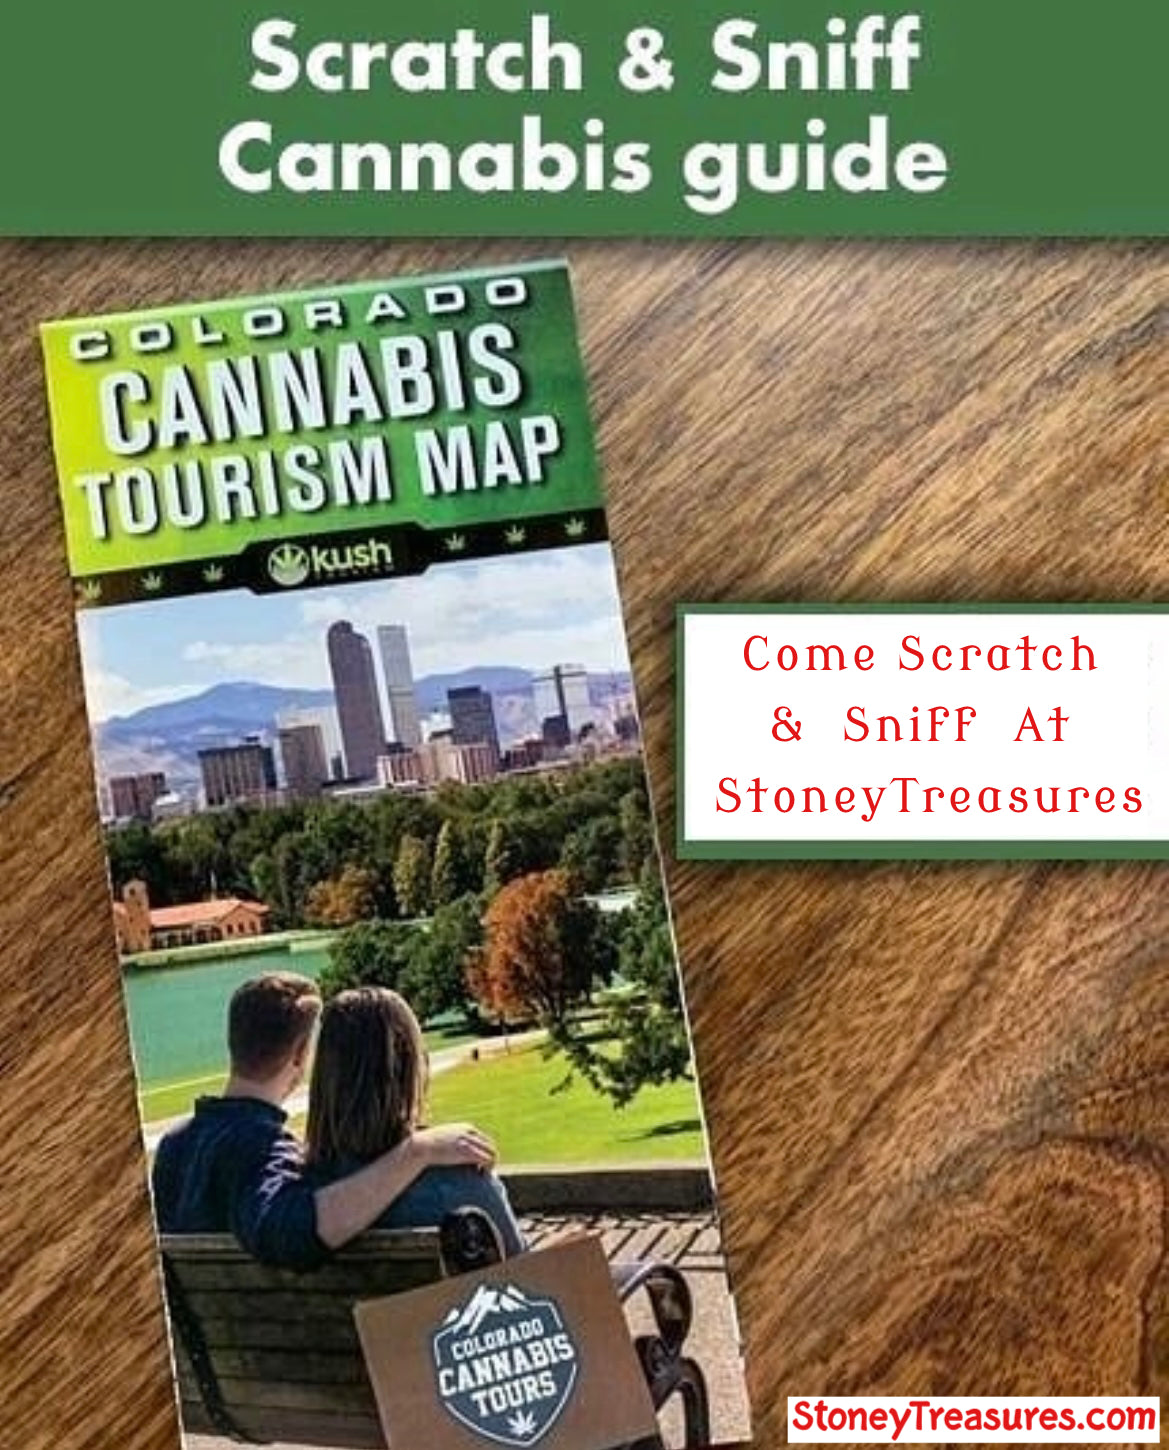 Scratch & Sniff Cannabis Guide. StoneyTreasures.com